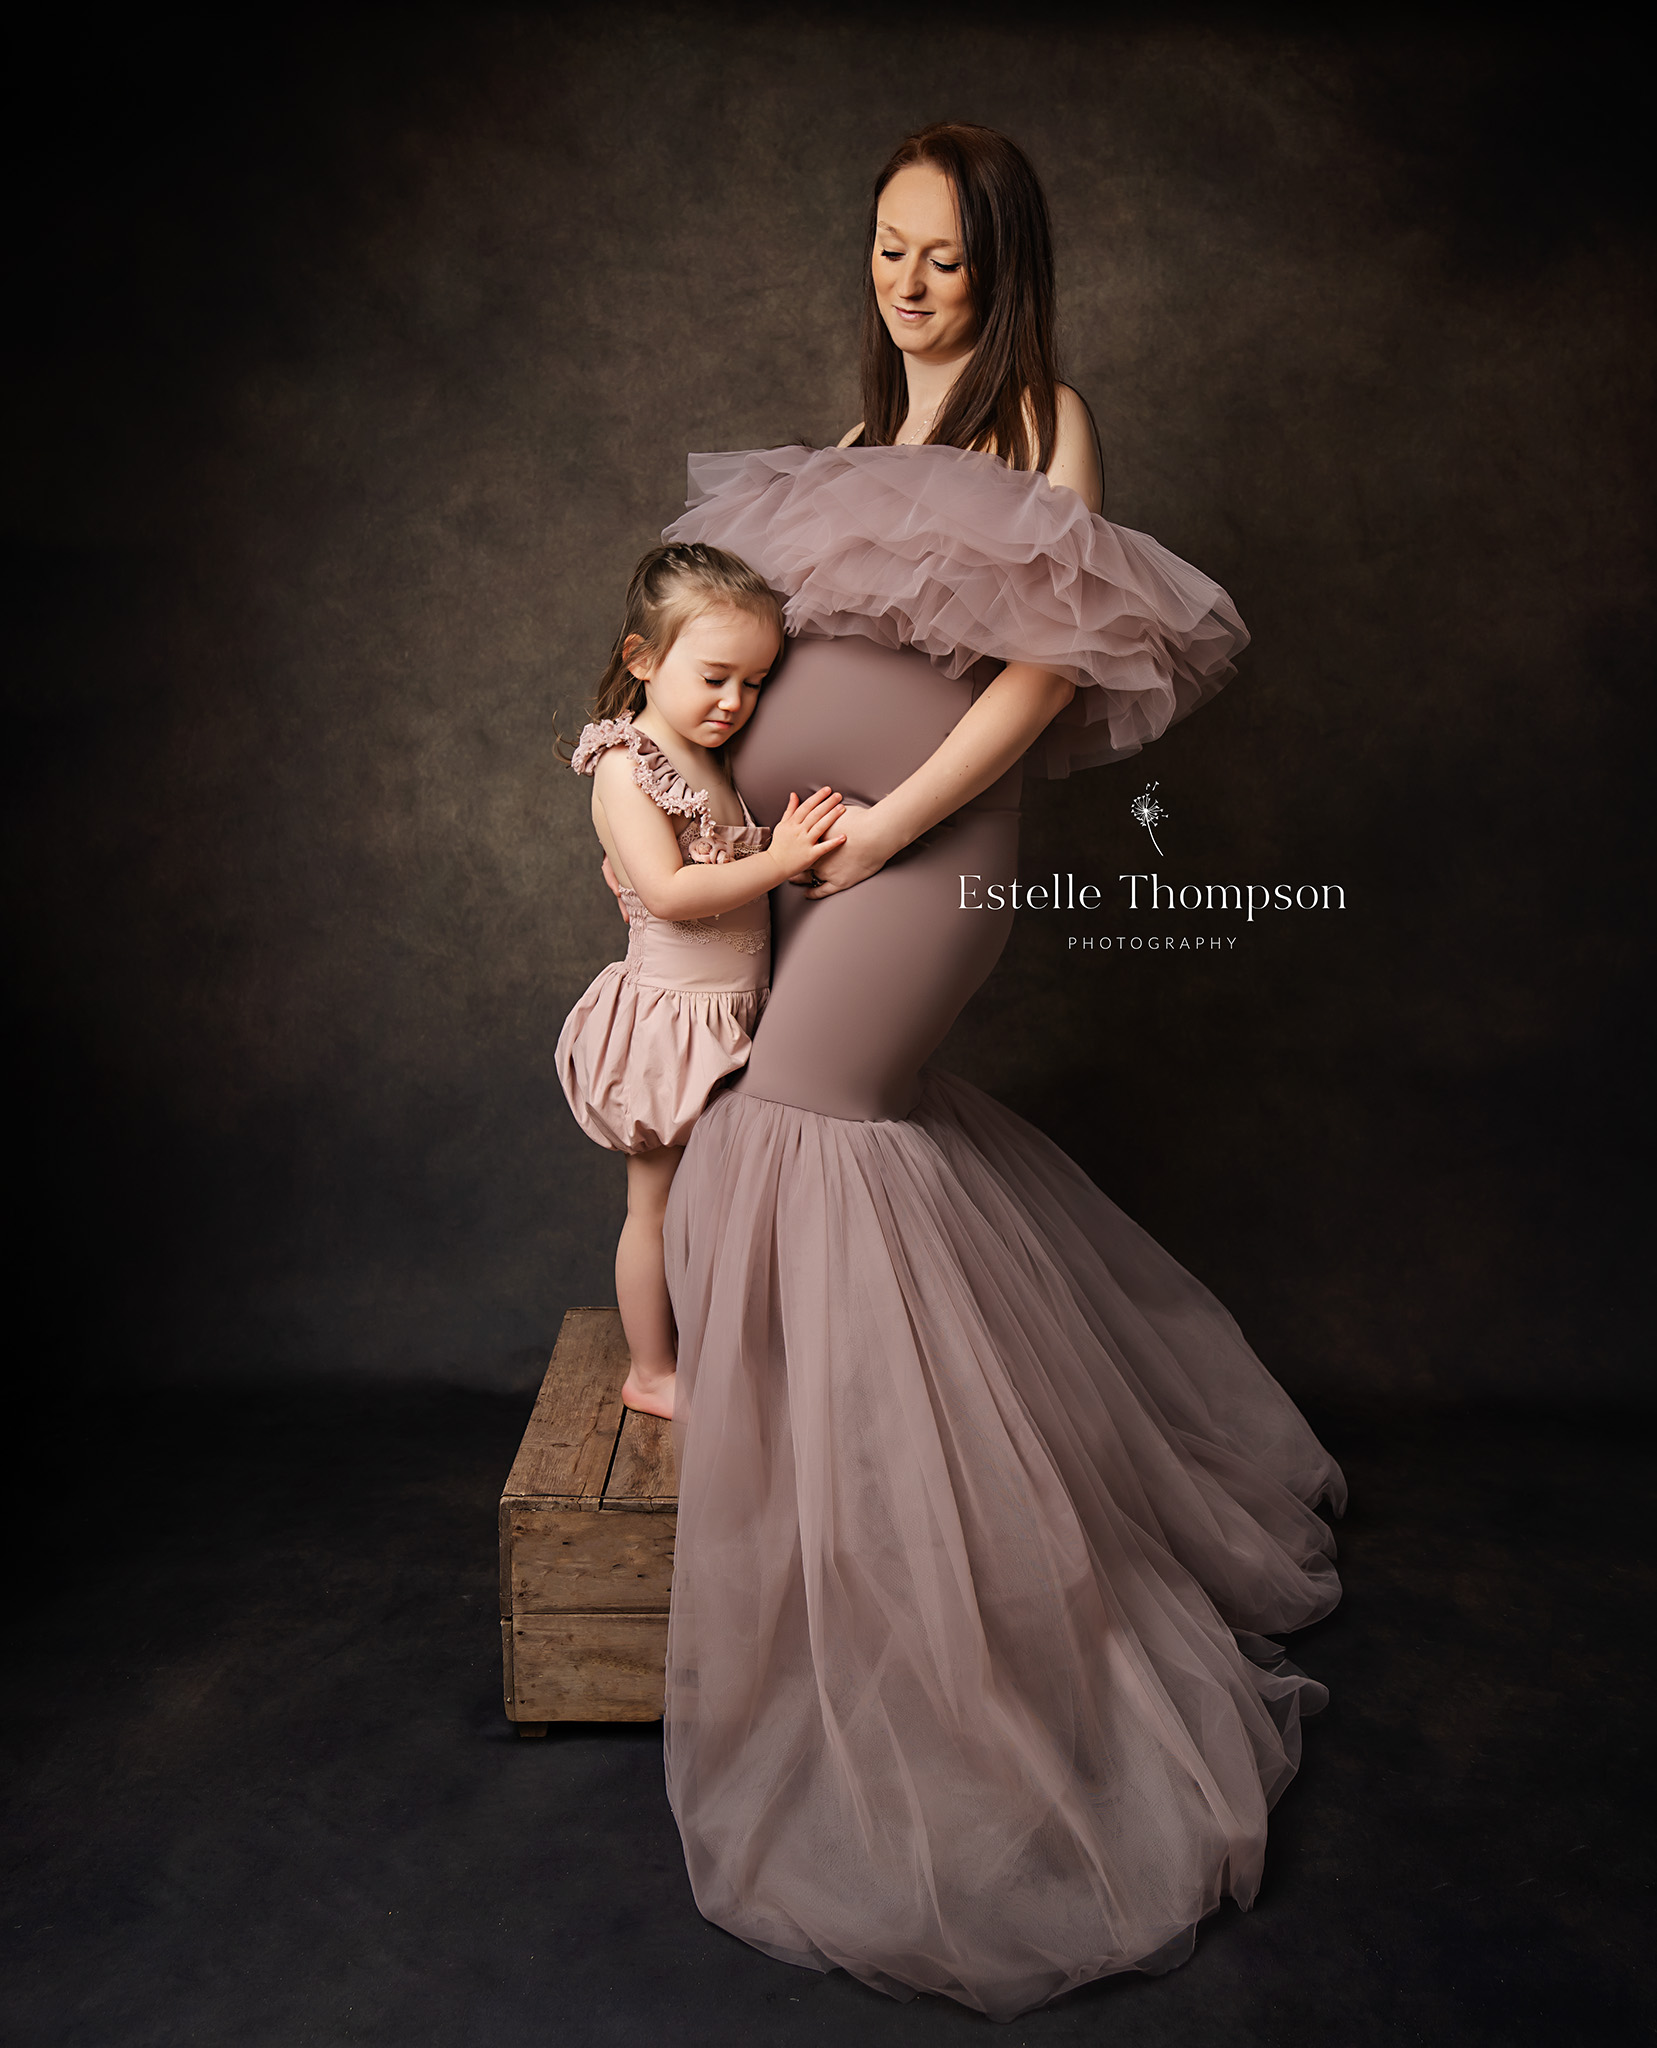 Pregnant lady wearing maternity dress on a Maternity photoshoot